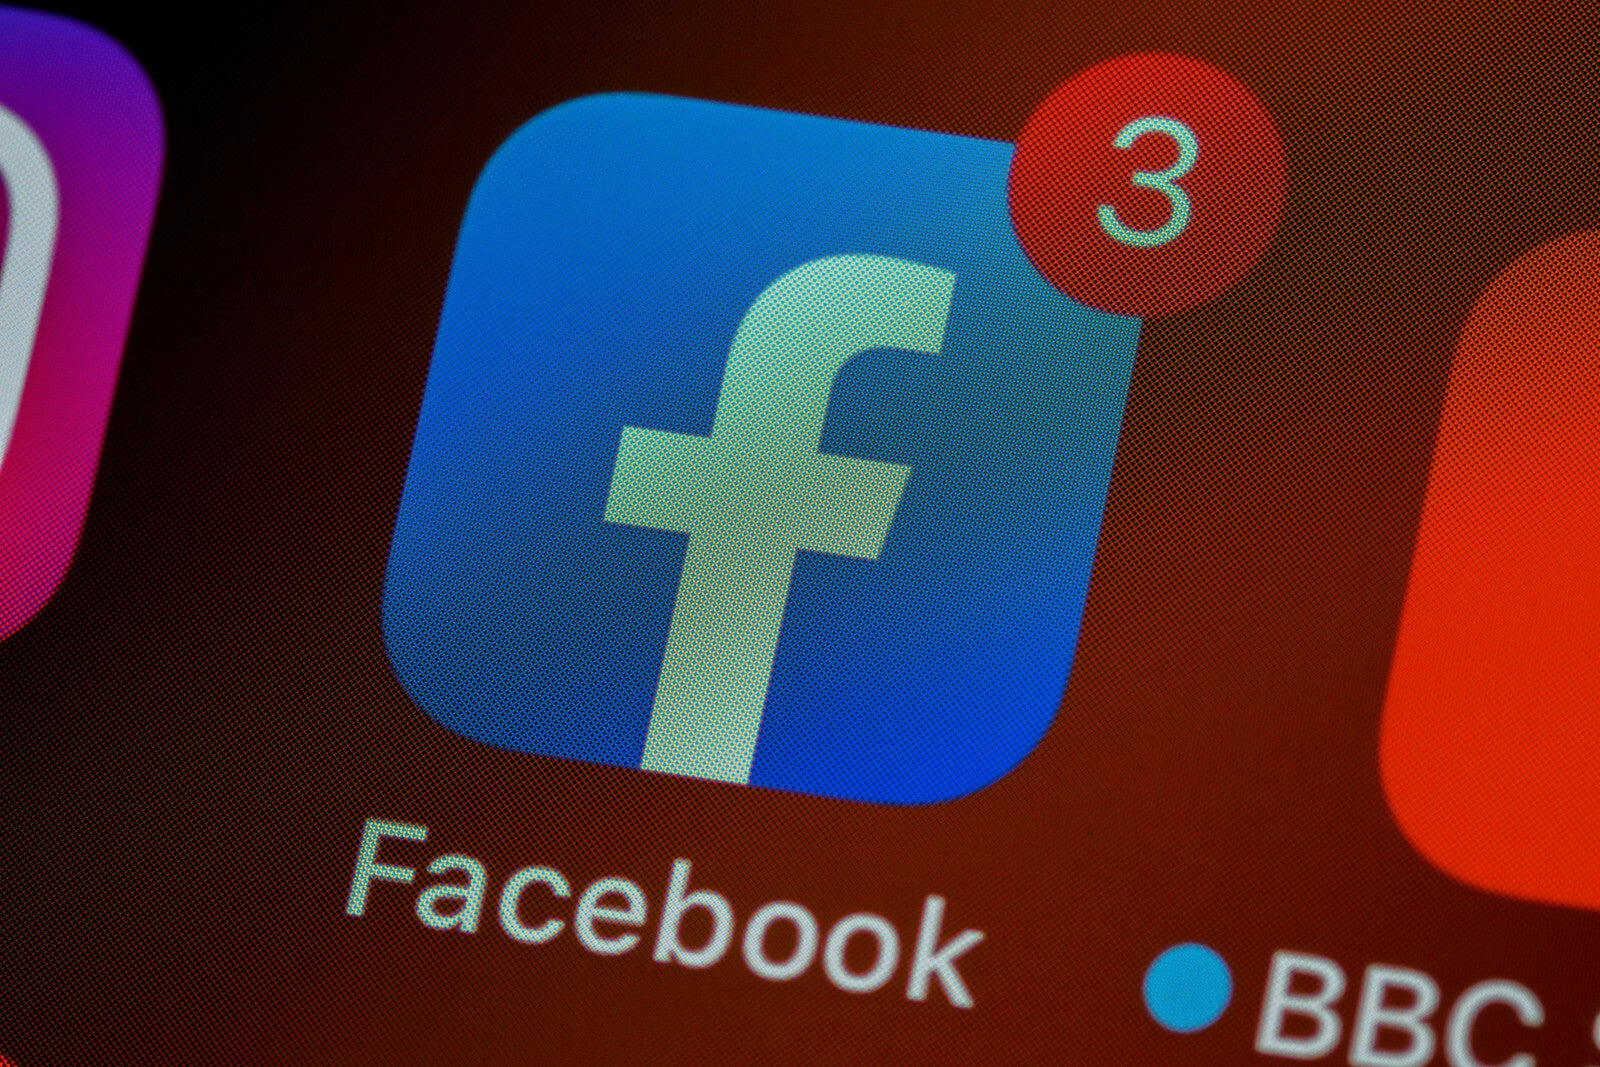 You may soon be able to call your friends directly from the Facebook app